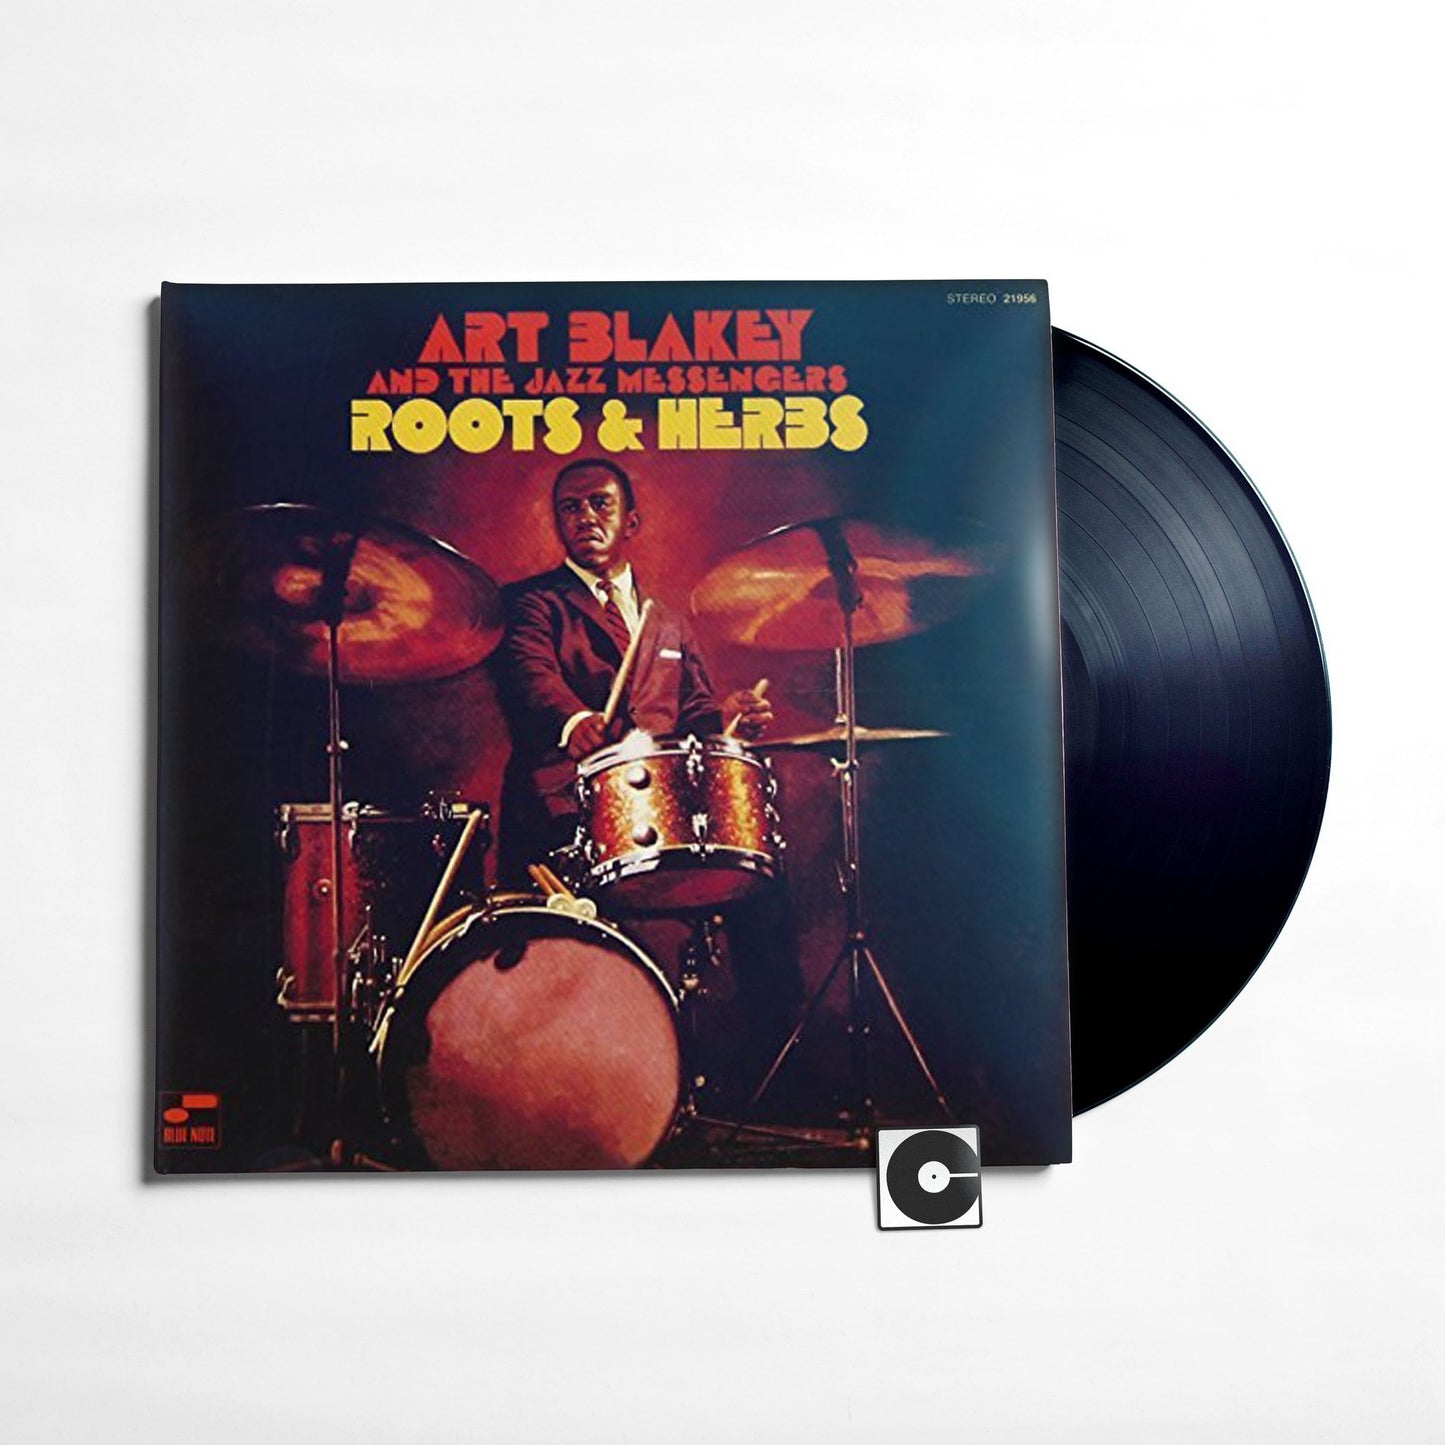 Art Blakey And The Jazz Messengers - "Roots And Herbs" Tone Poet